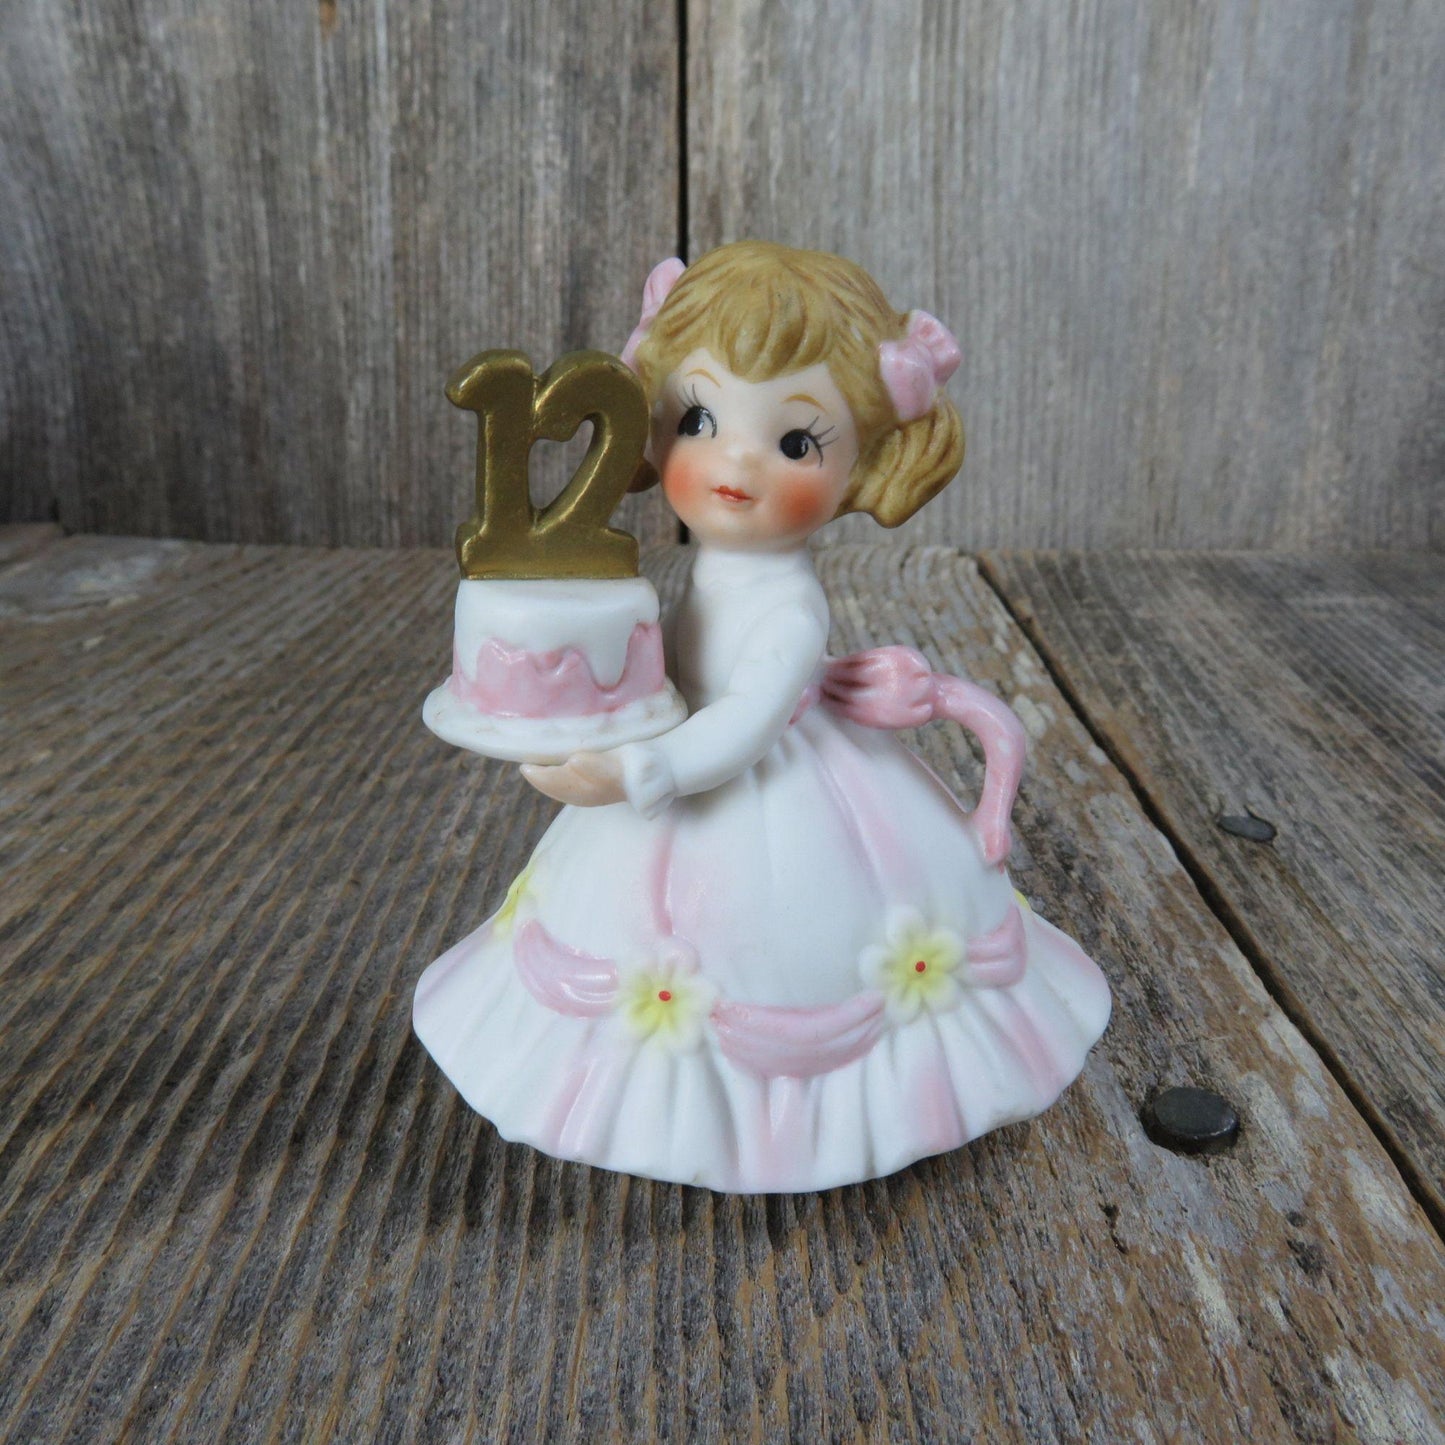 Vintage Birthday Girl Cake Topper Figurine 12th Twelfth Pink Dress Pig Tails Taiwan